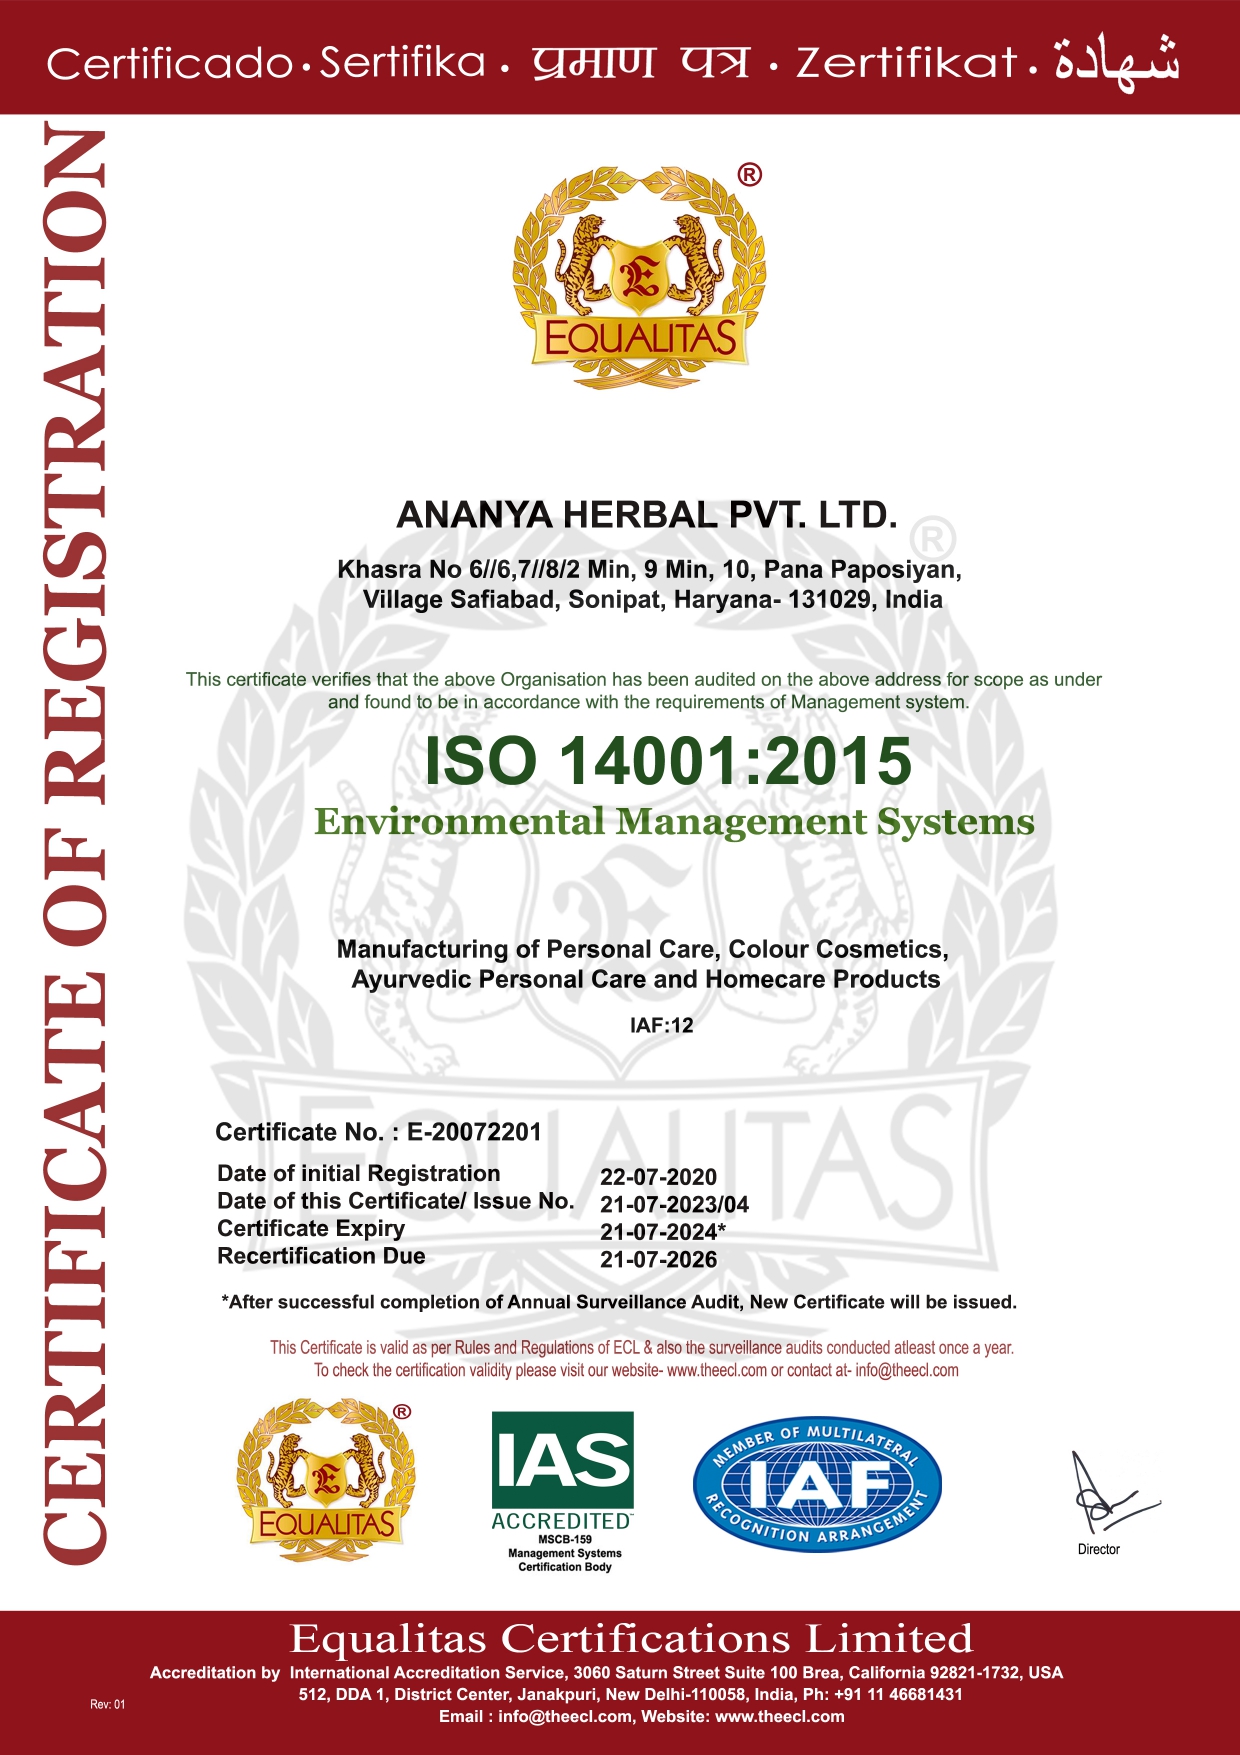 ISO 14001-2016